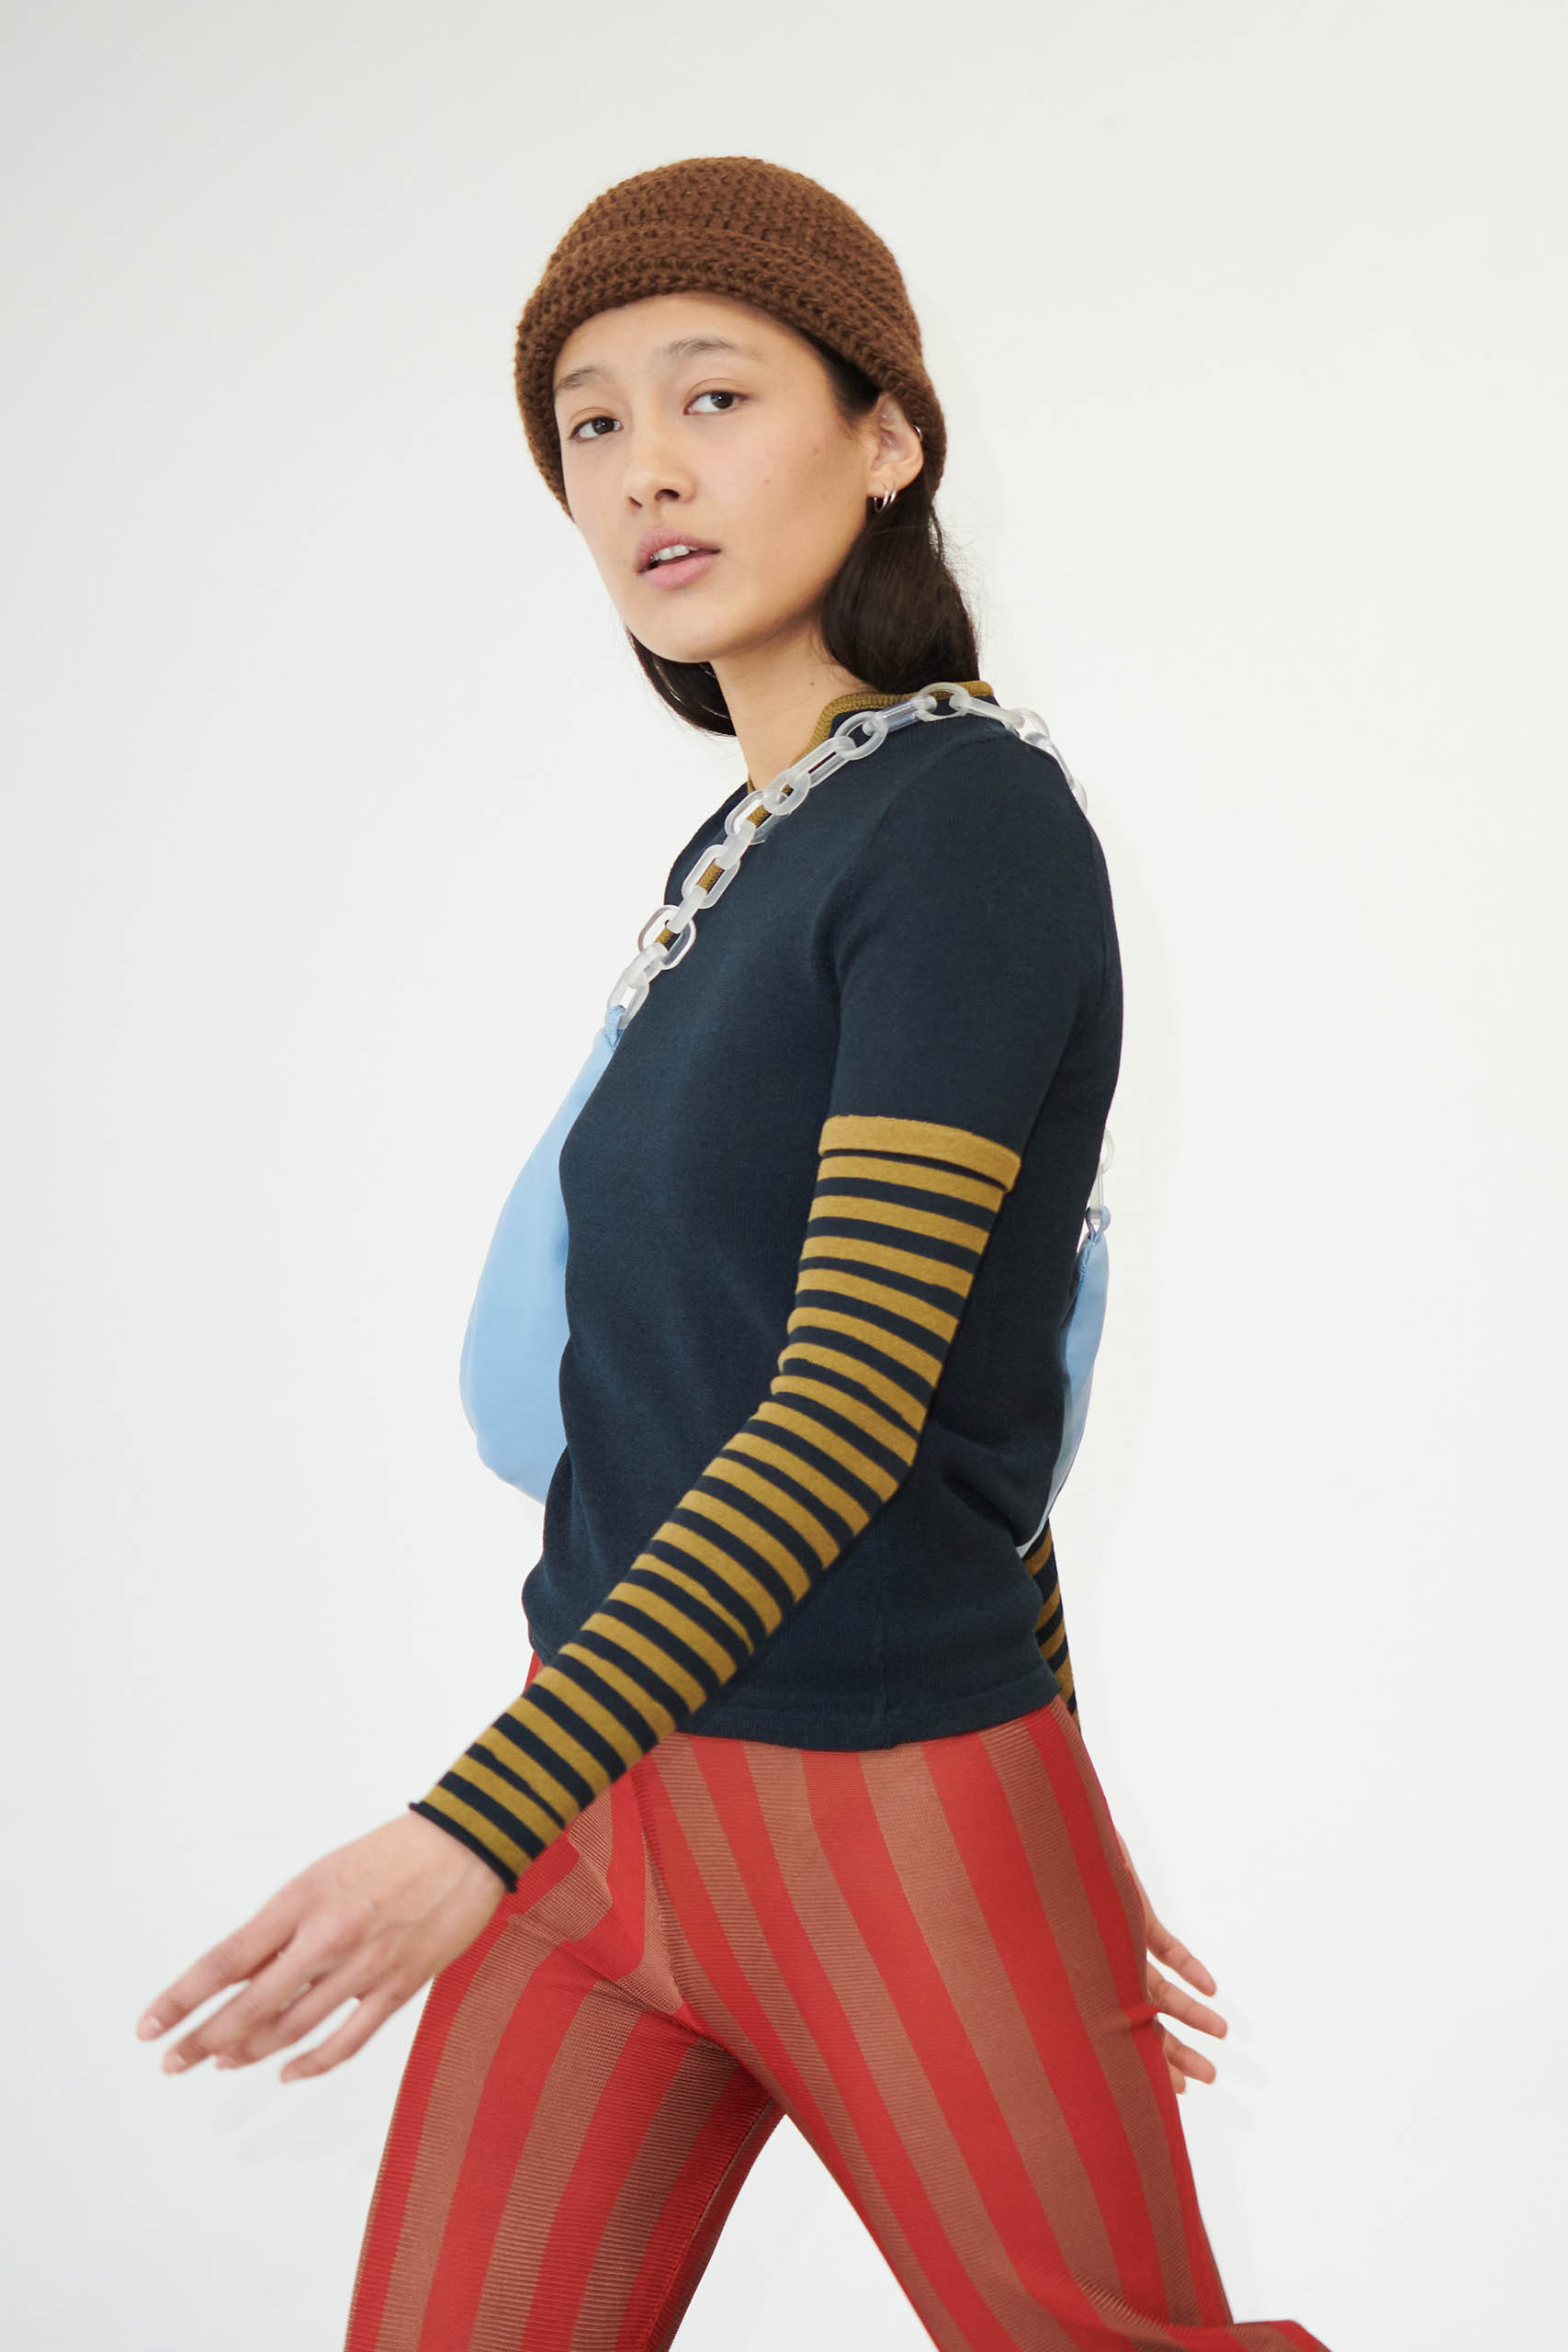 TL180 KNITWEAR NEW IN CLOTHES ACCESSORIES SKIRT TOP PANTS 0036 TL-180 FEB 22 29